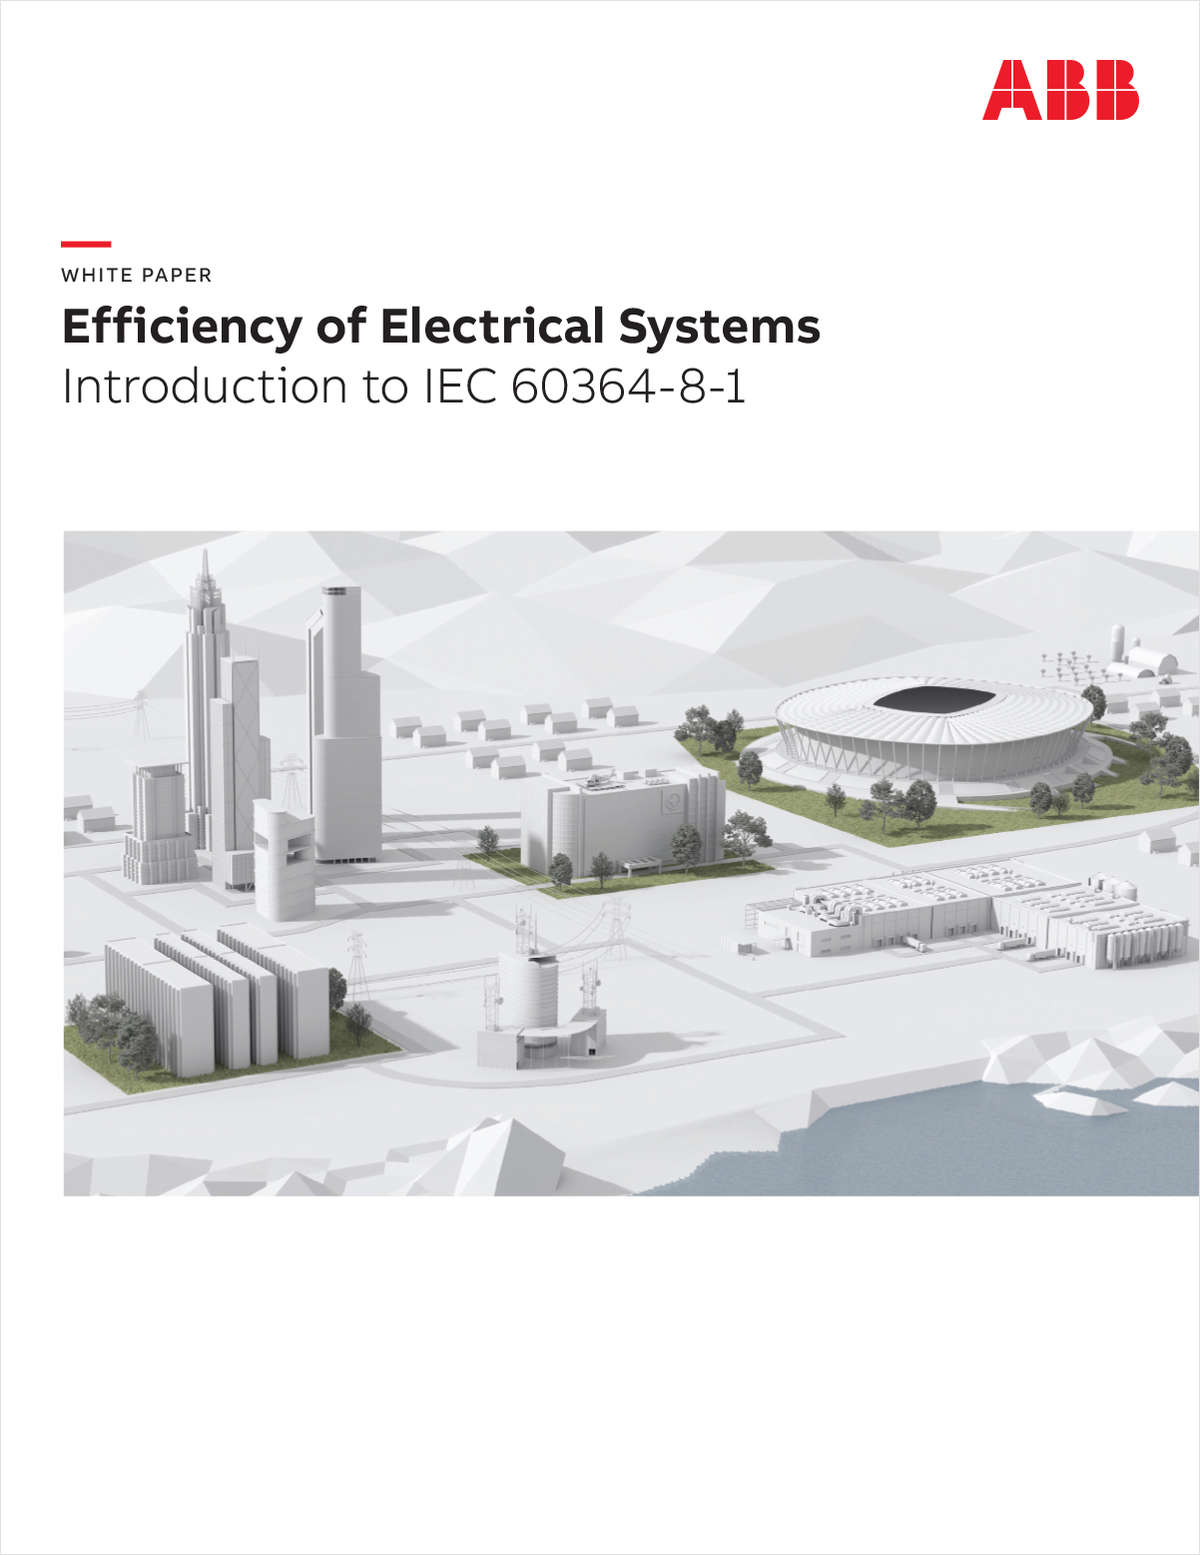 Efficiency of Electrical Systems: Introduction to IEC 60364-8-1 - IE